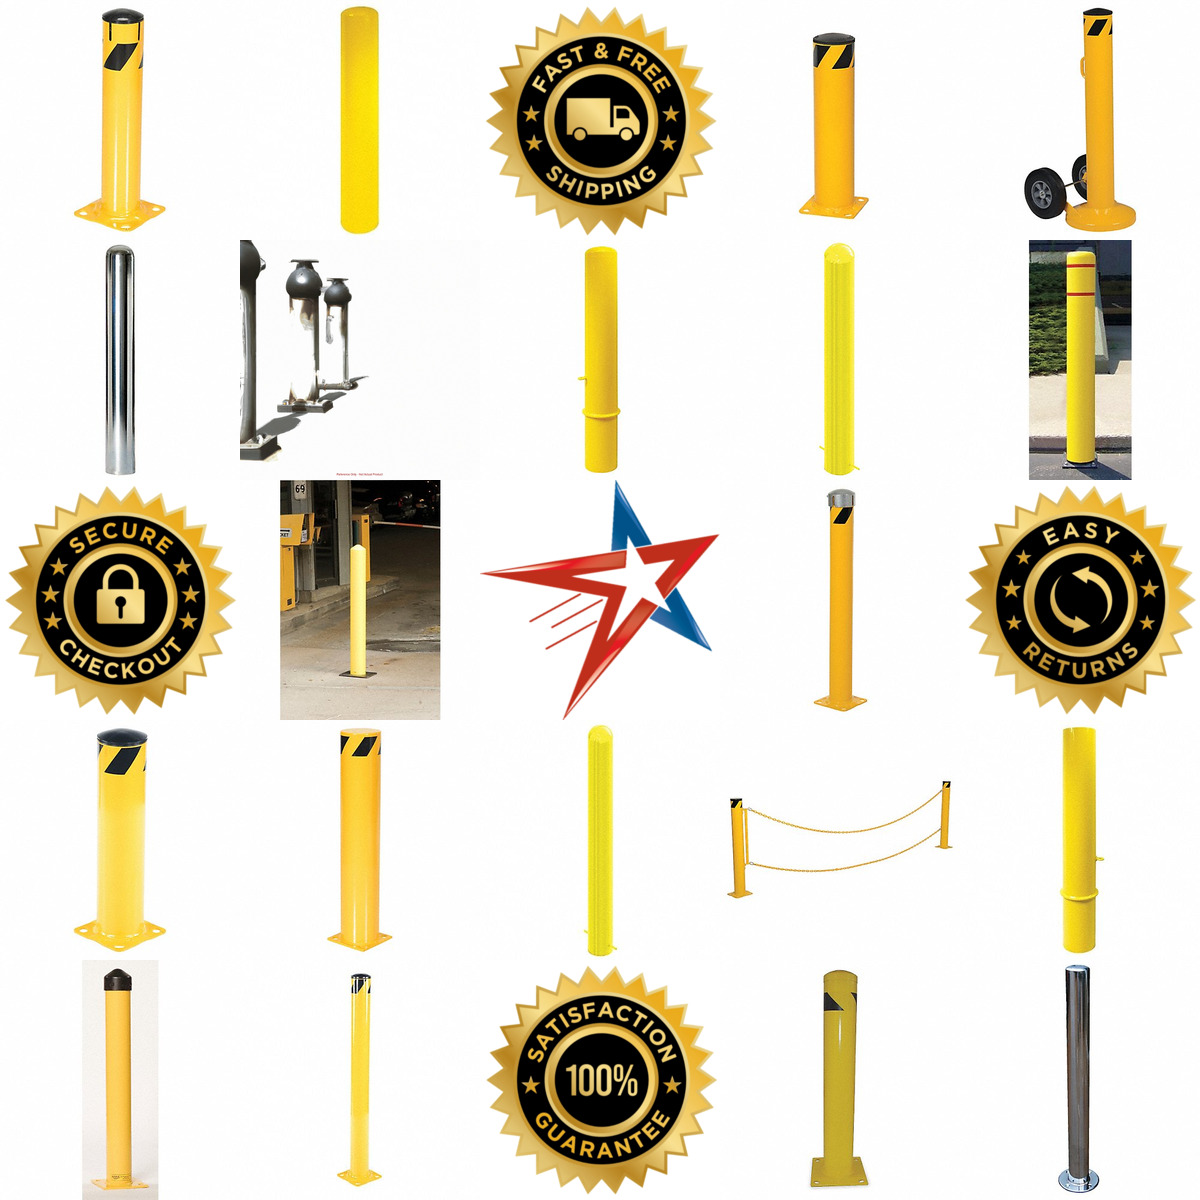 A selection of Bollards products on GoVets